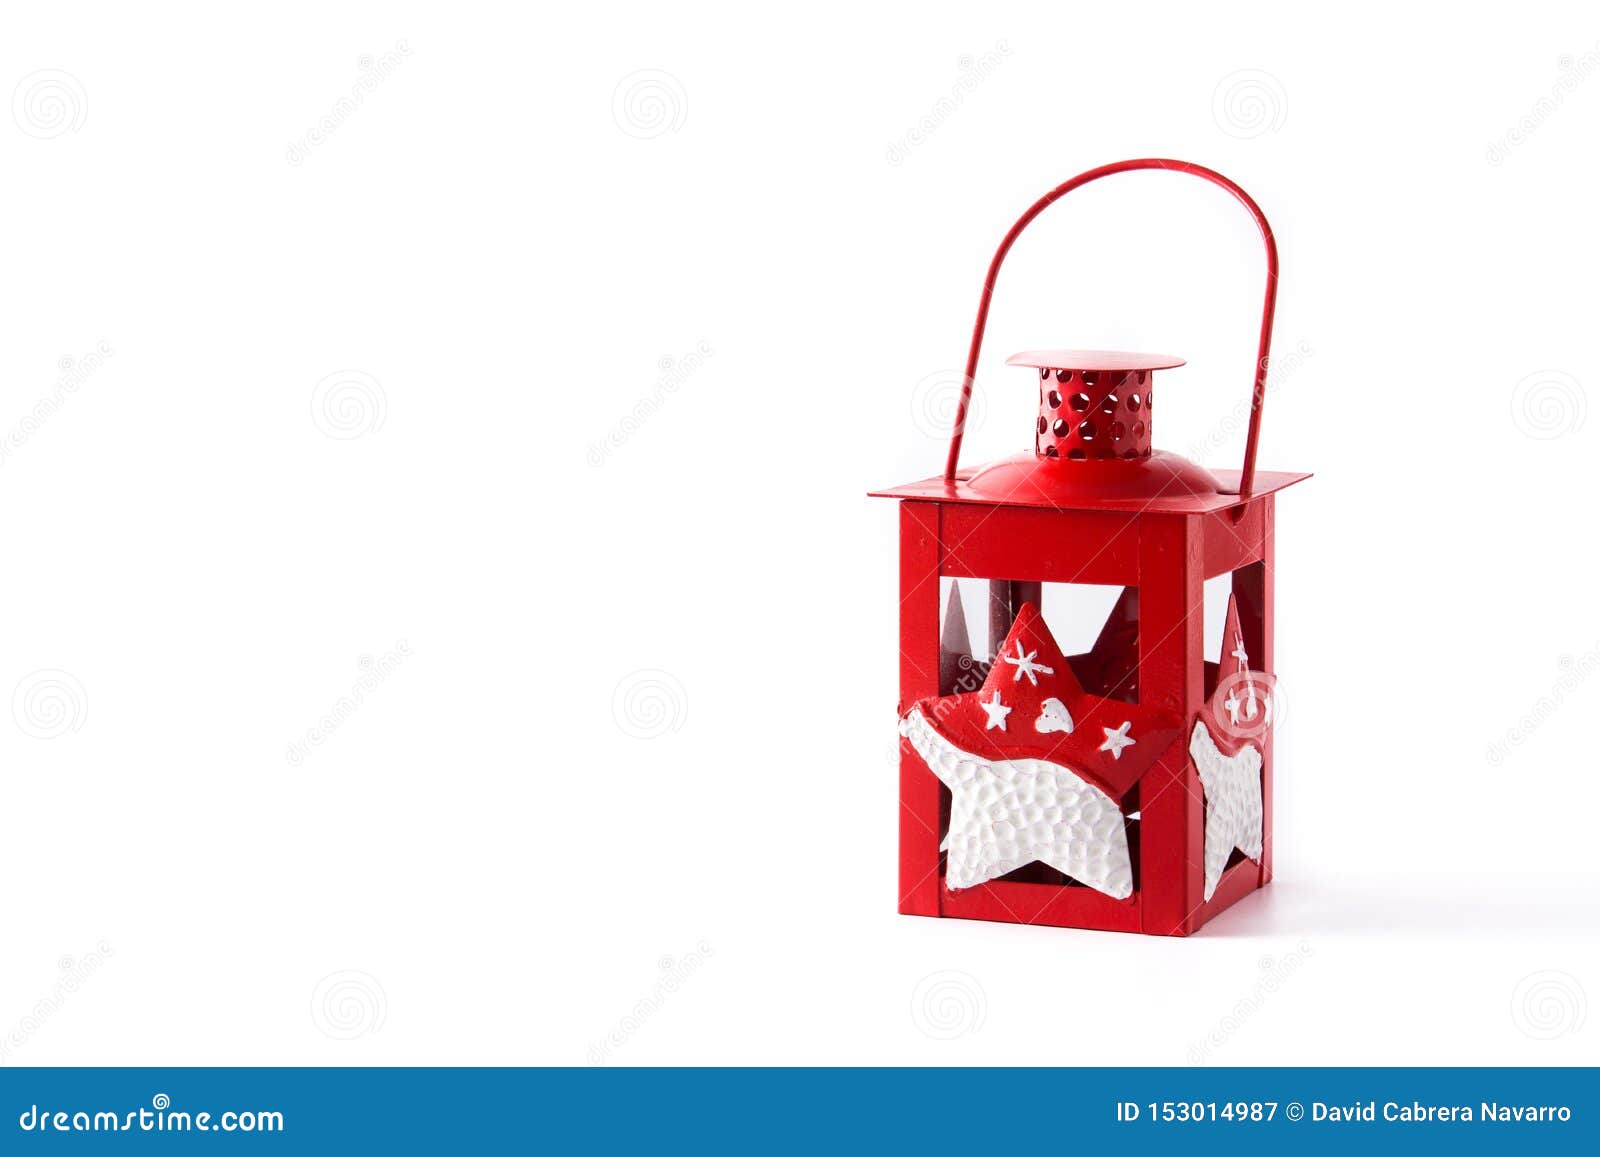 Red Christmas Lantern Isolated Stock Image - Image of cold, candle ...